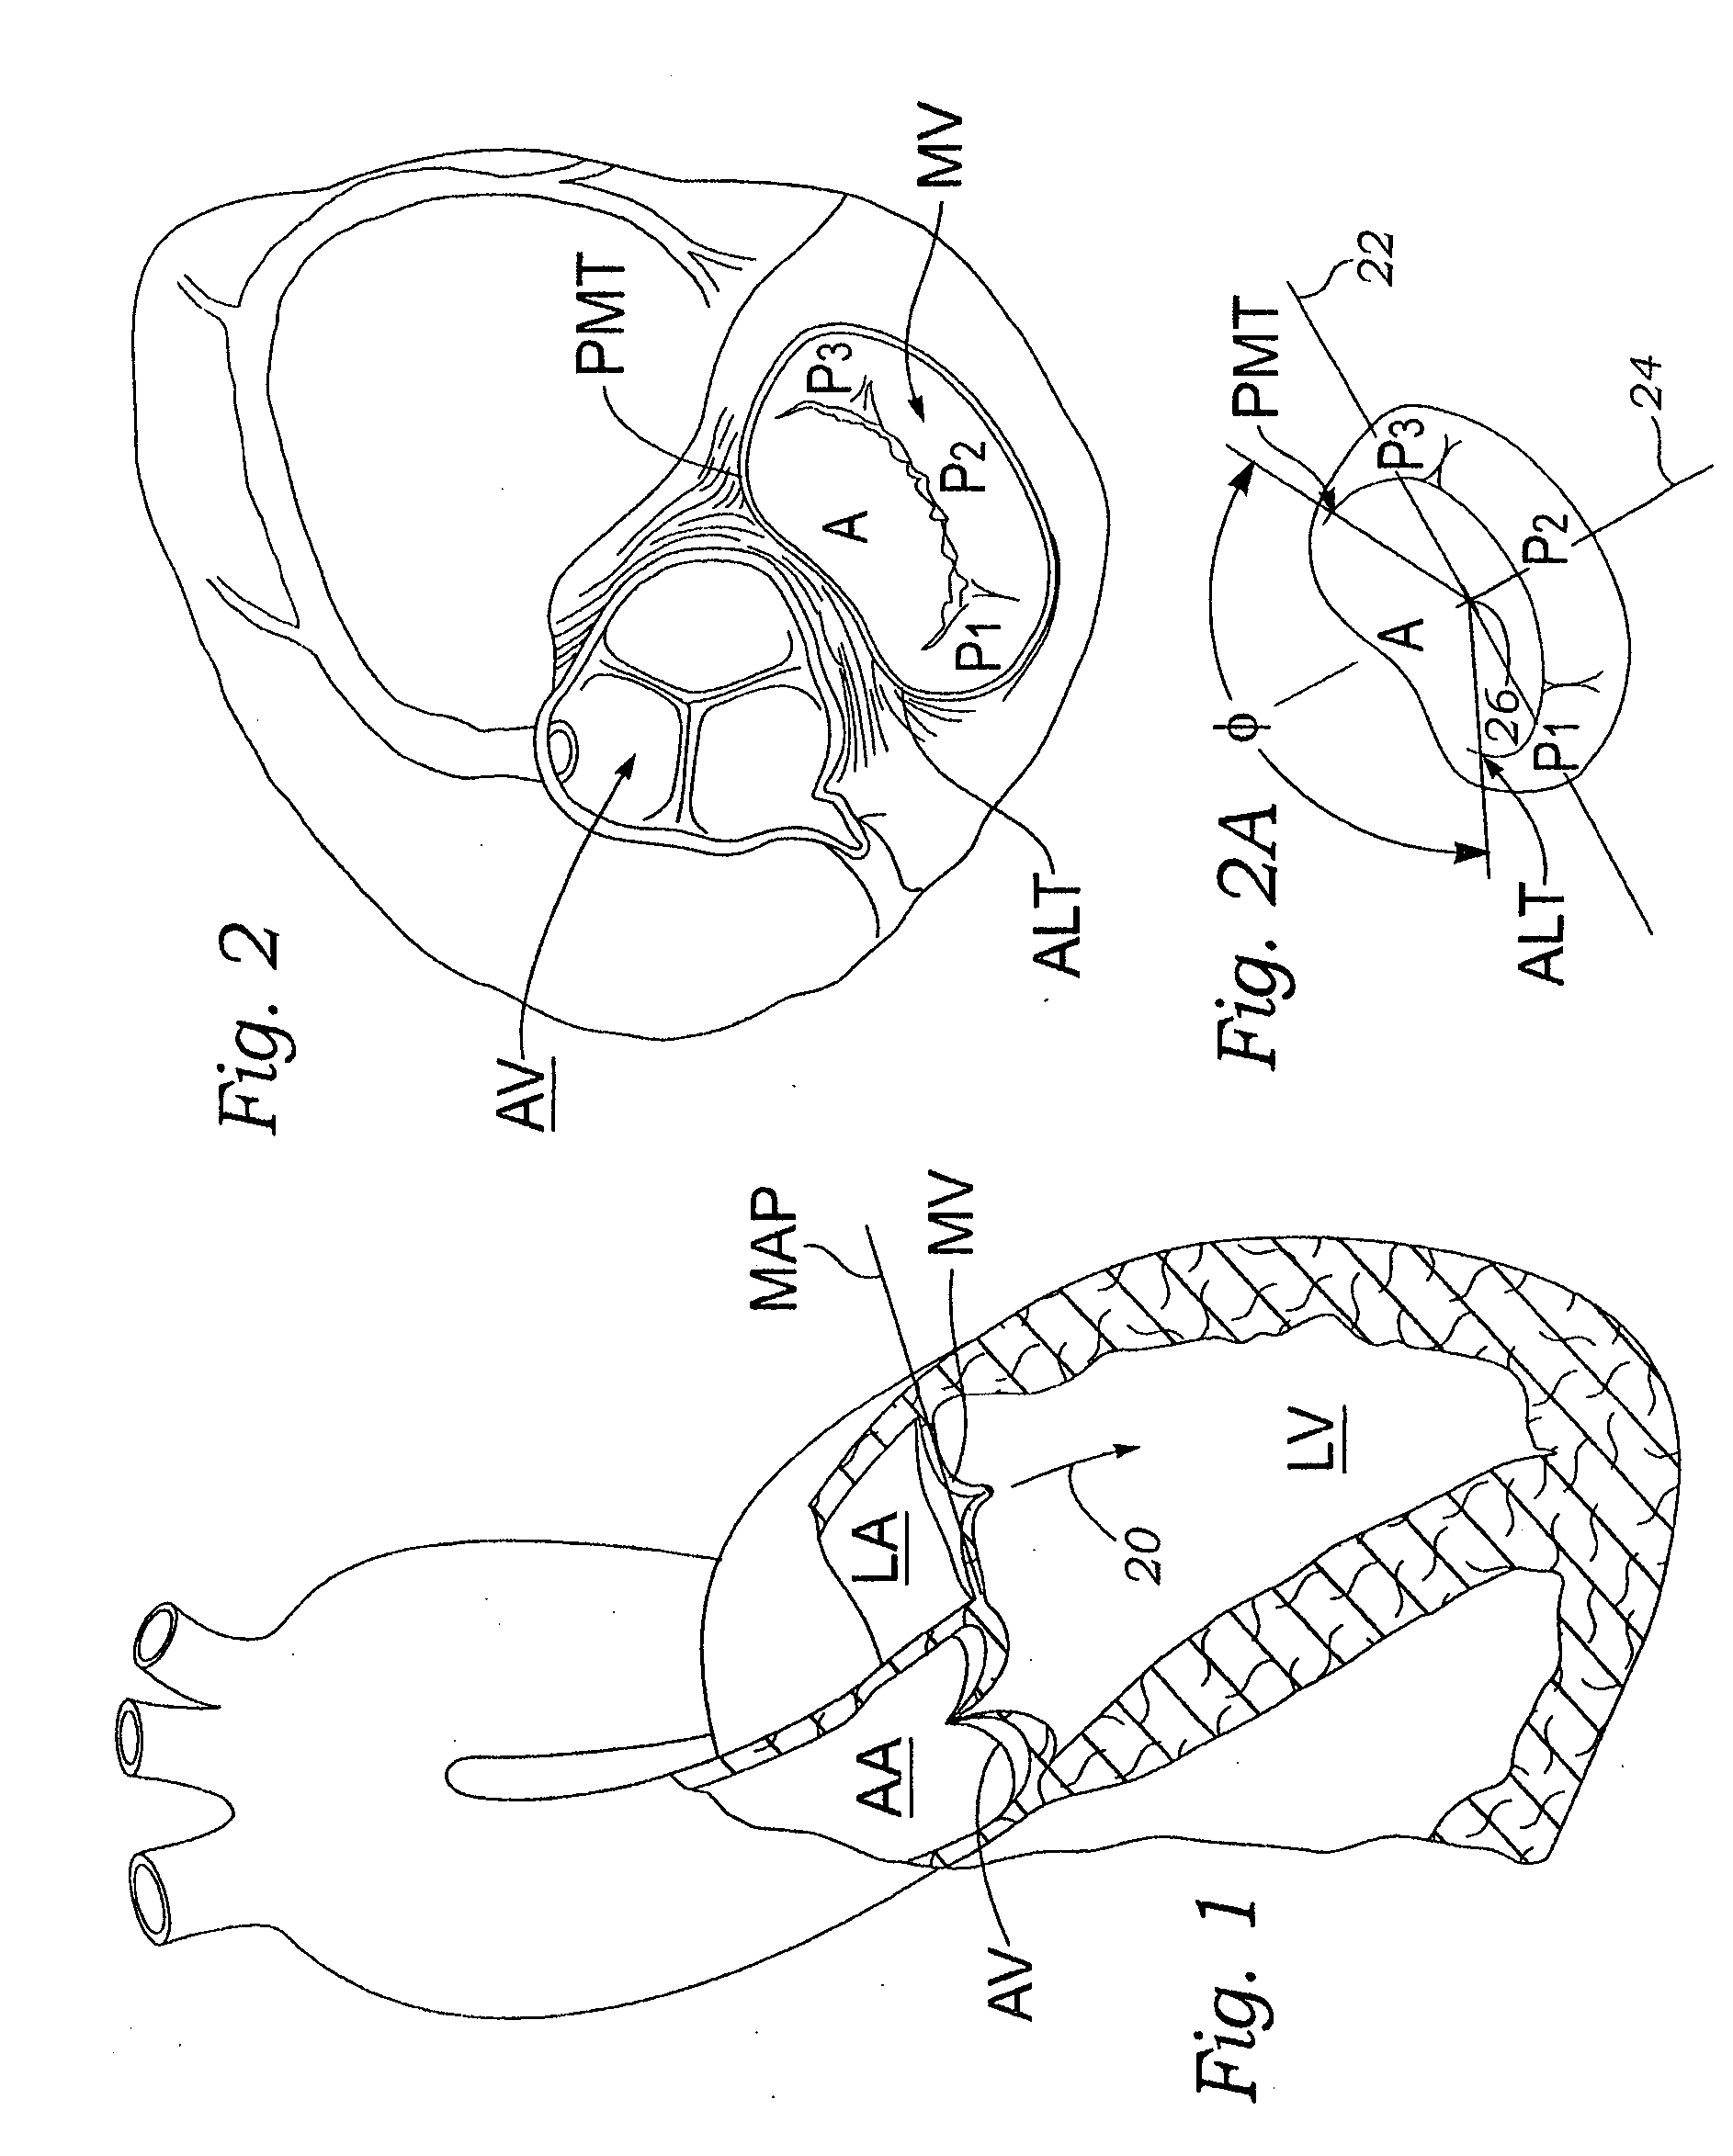 Prosthetic mitral heart valve having a contoured sewing ring